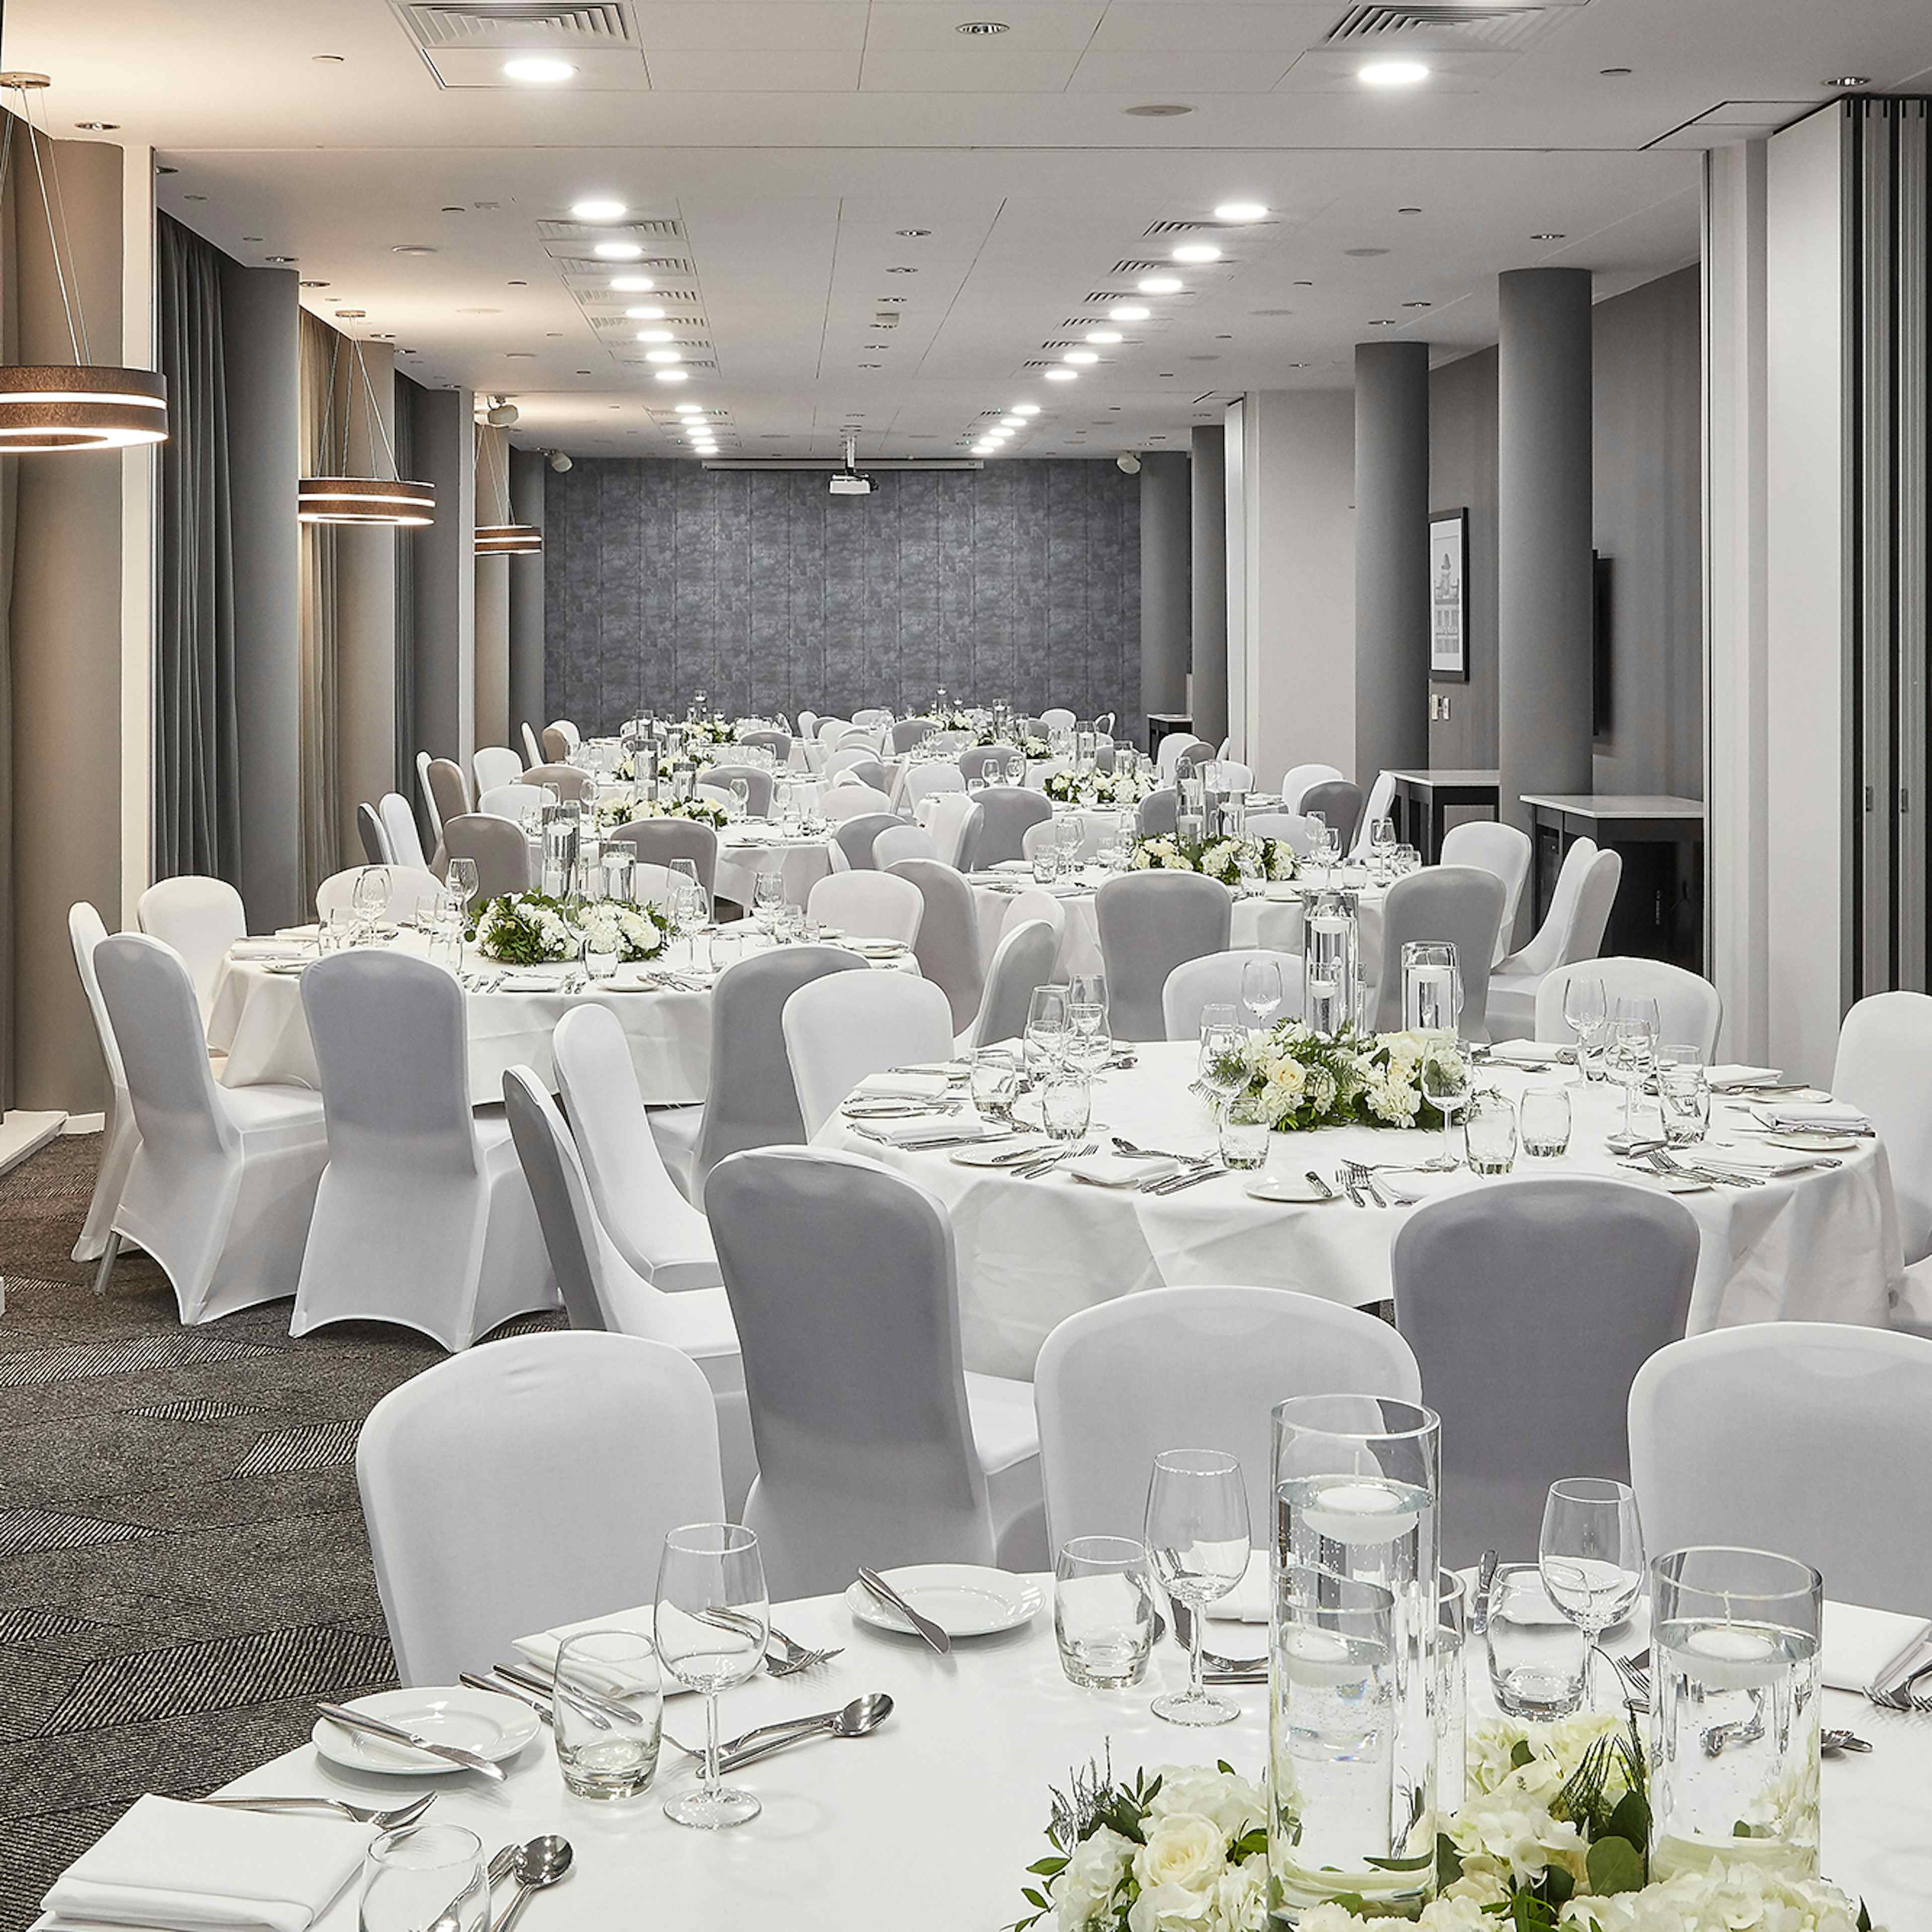 DoubleTree by Hilton Manchester - Palaces image 2